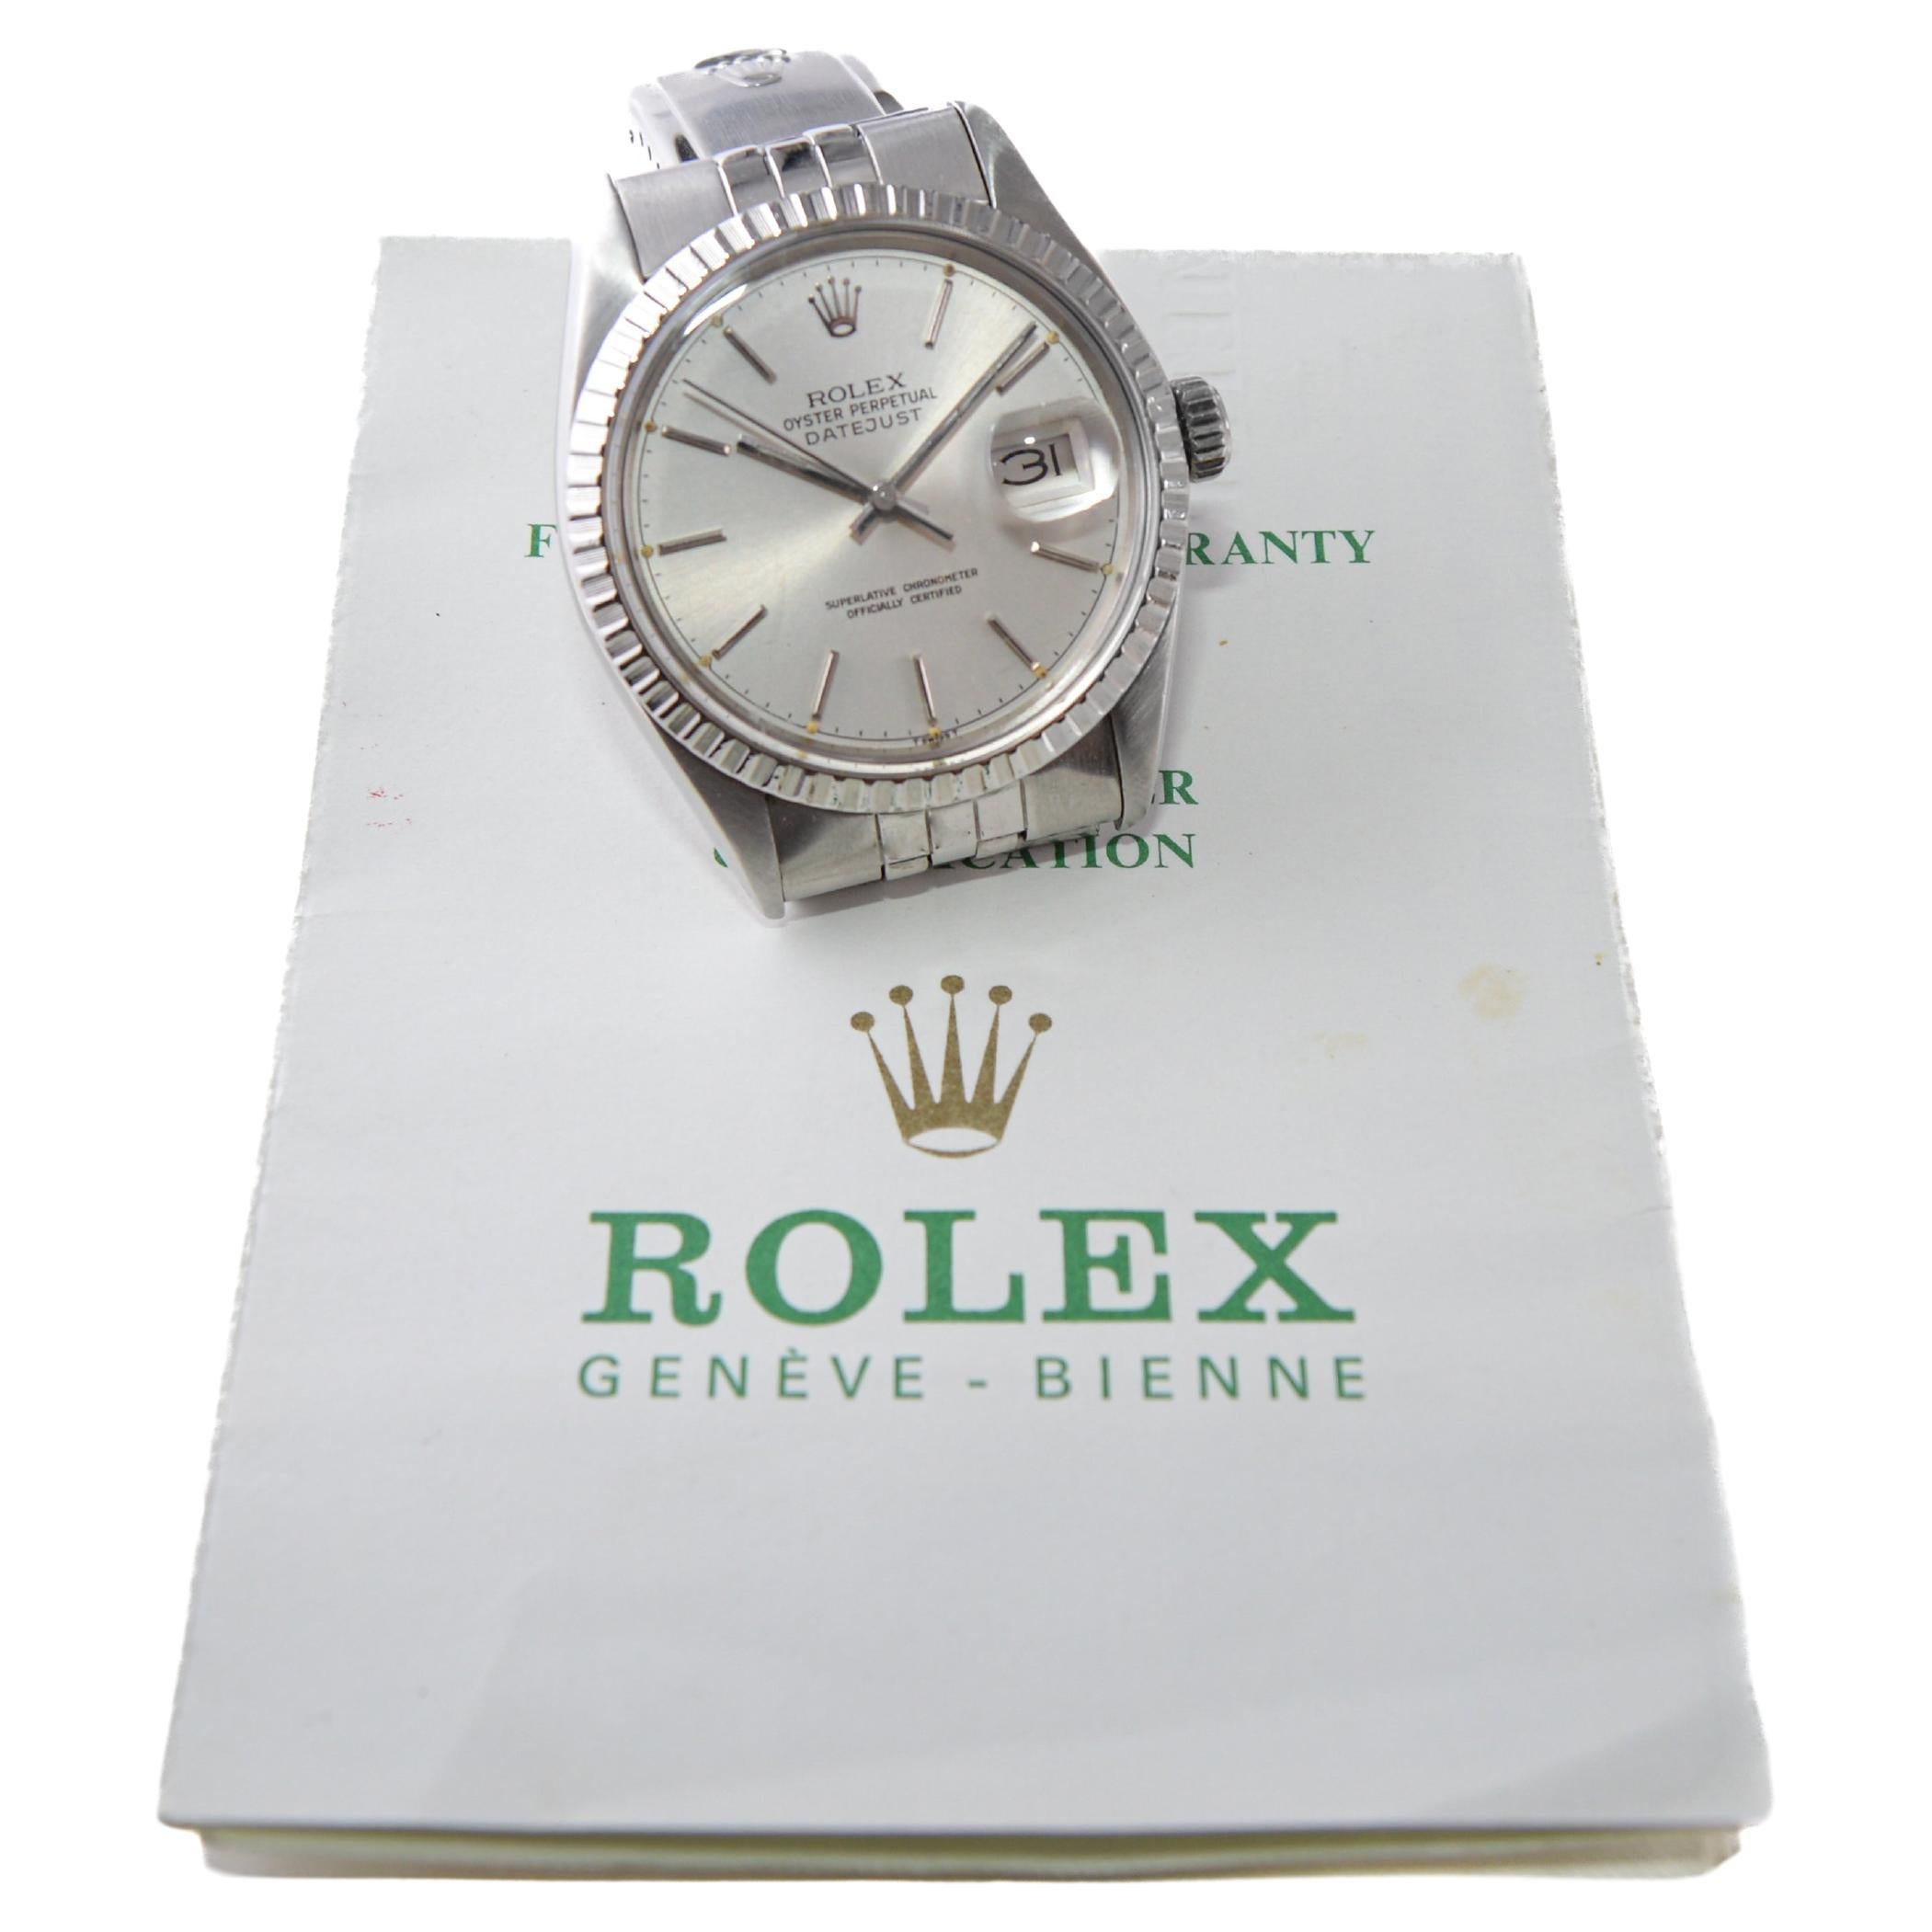 FACTORY / HOUSE: Rolex Watch Company
STYLE / REFERENCE: Datejust / Reference 16030
METAL / MATERIAL: Stainless Steel
CIRCA / YEAR: 1978 / 79
DIMENSIONS / SIZE: Length 43mm X Diameter 36mm
MOVEMENT / CALIBER: Perpetual Winding / 26 Jewels / Caliber